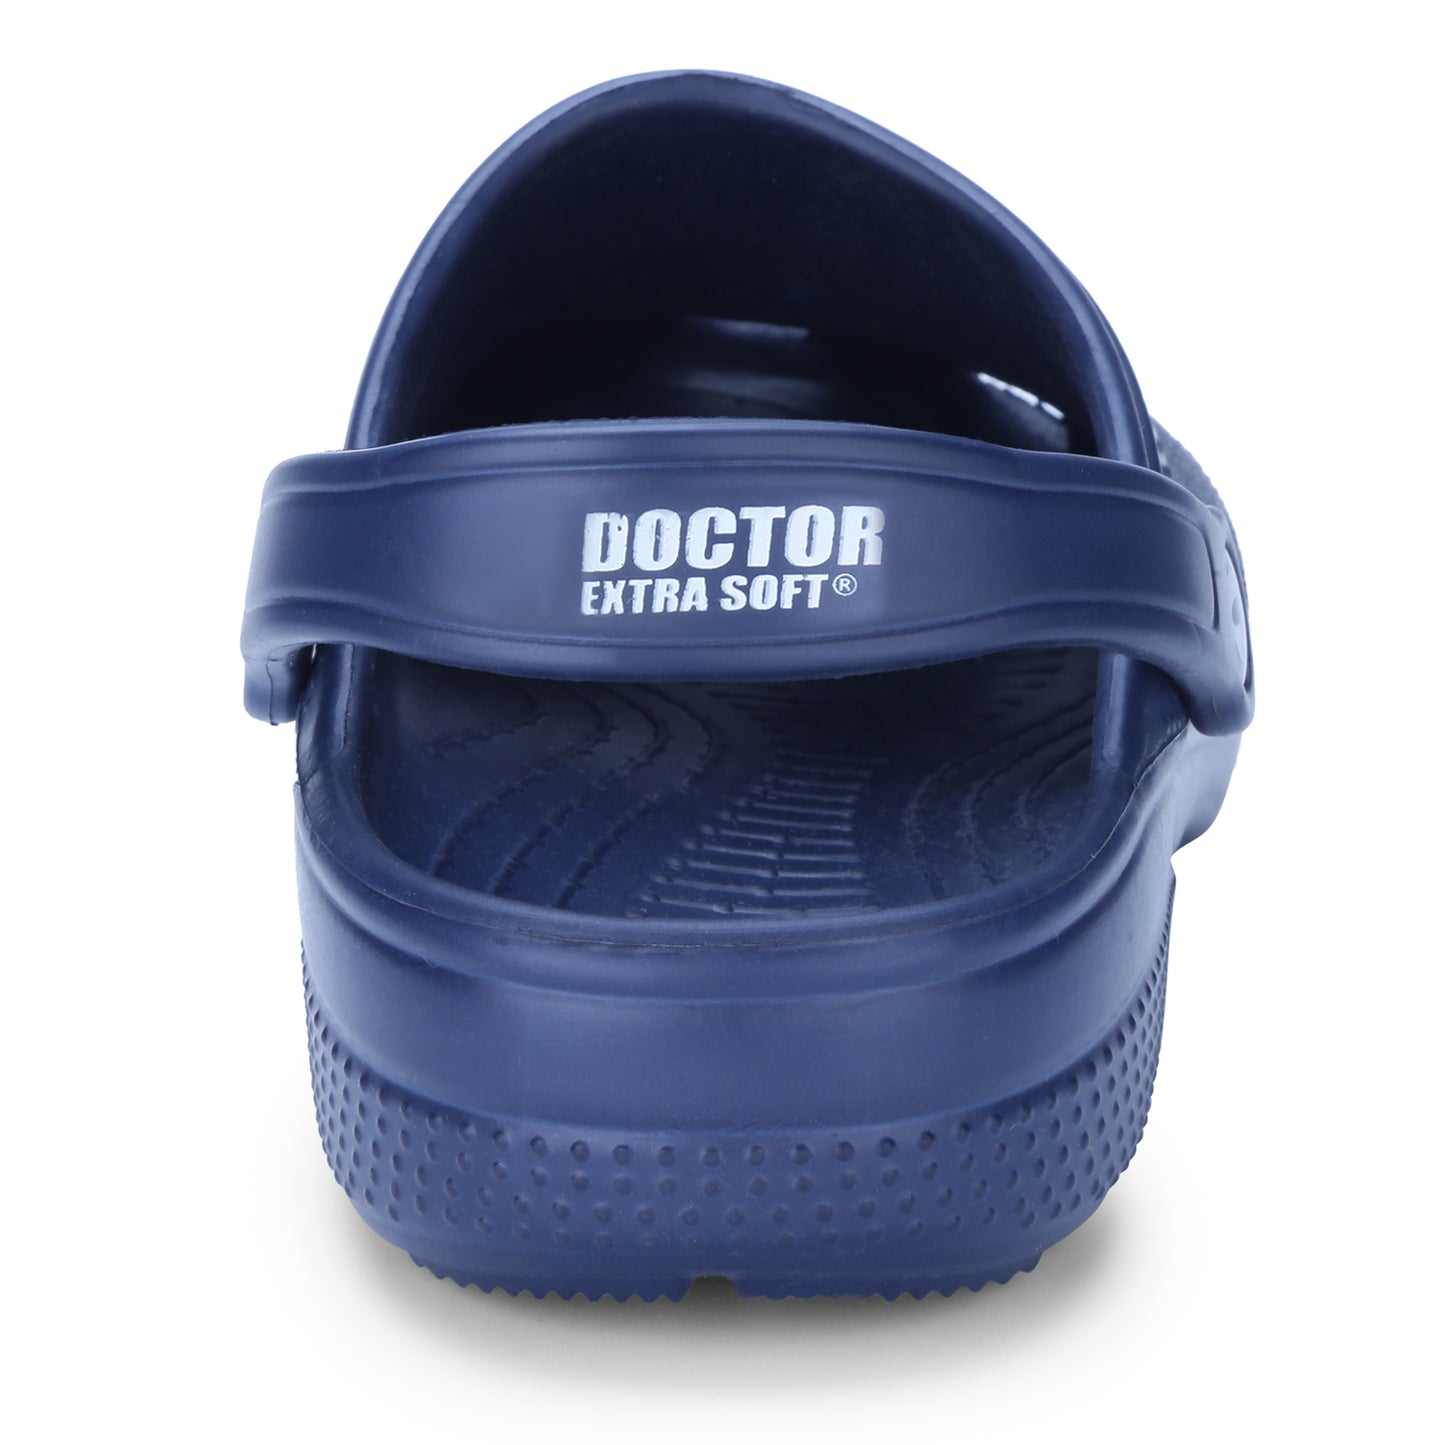 DOCTOR EXTRA SOFT D-501 Men's Classic Casual Clogs/Sandals with Adjustable Back Strap for Adult | Comfortable & Light Weight | Stylish & Anti-Skid | Waterproof & Everyday Use Mules for Gents/Boys